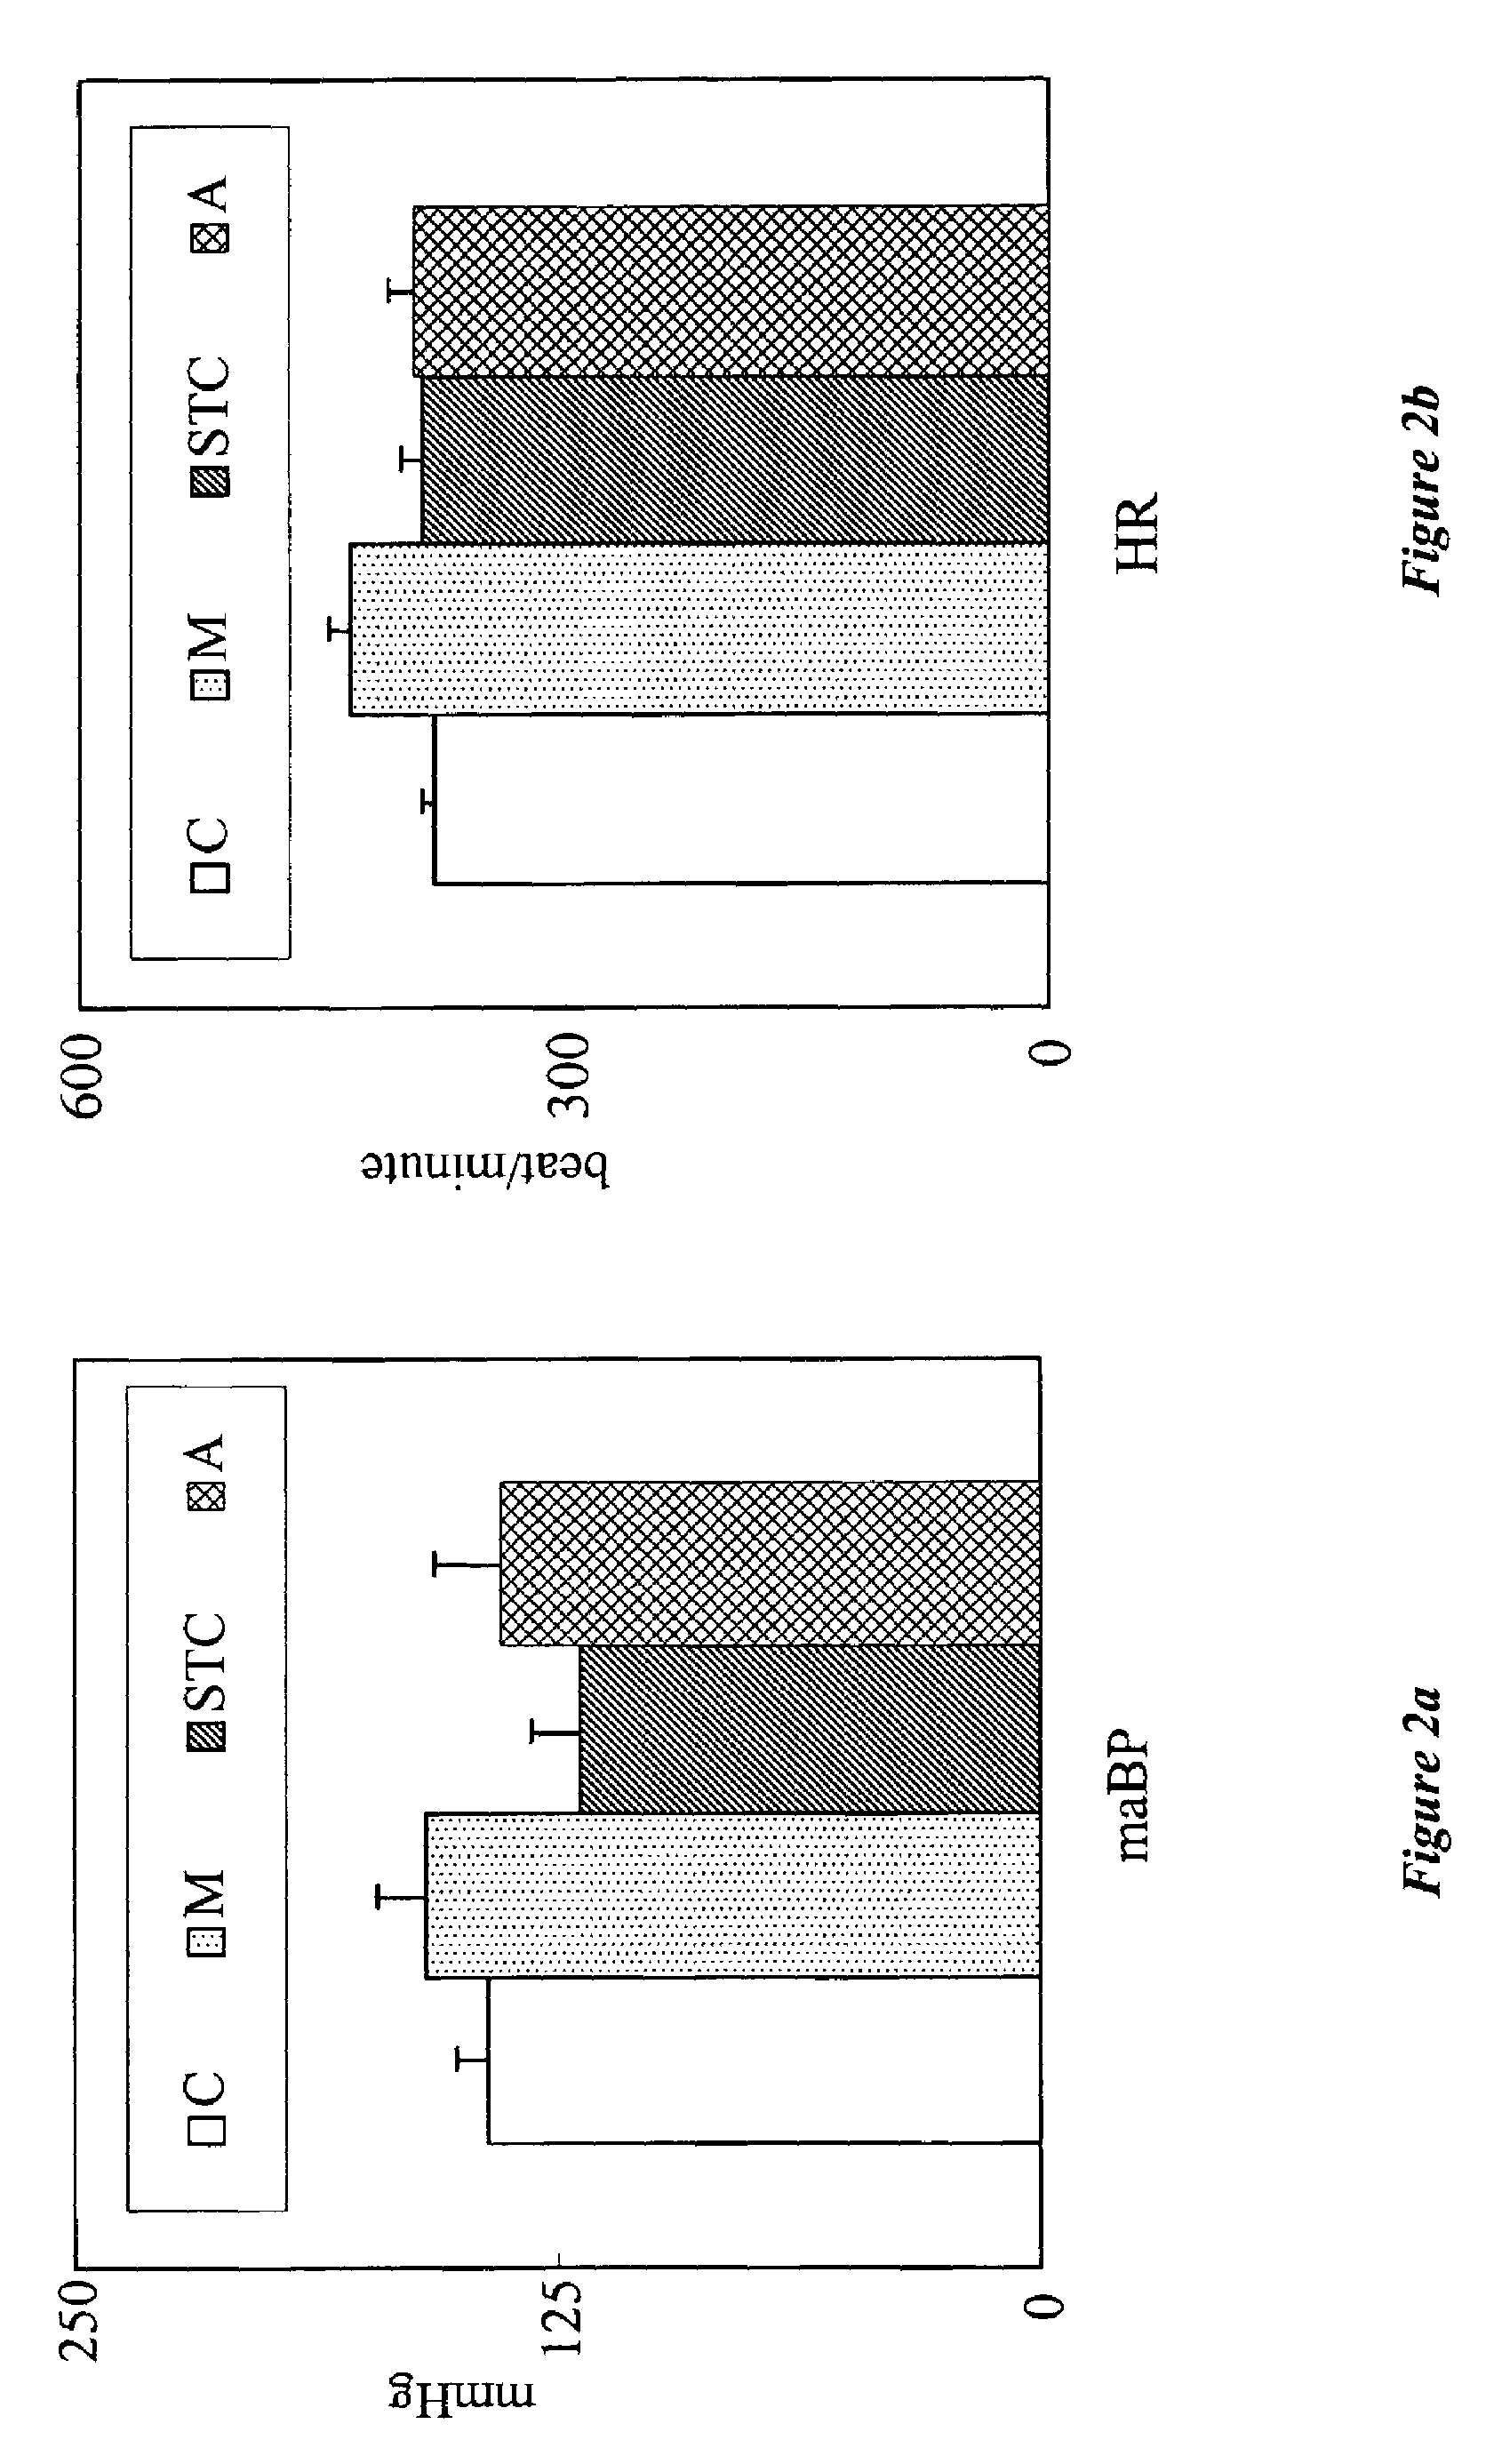 Herbal pharmaceutical compositions for prophylaxis and/or treatment of cardiovascular diseases and the method of preparing the same